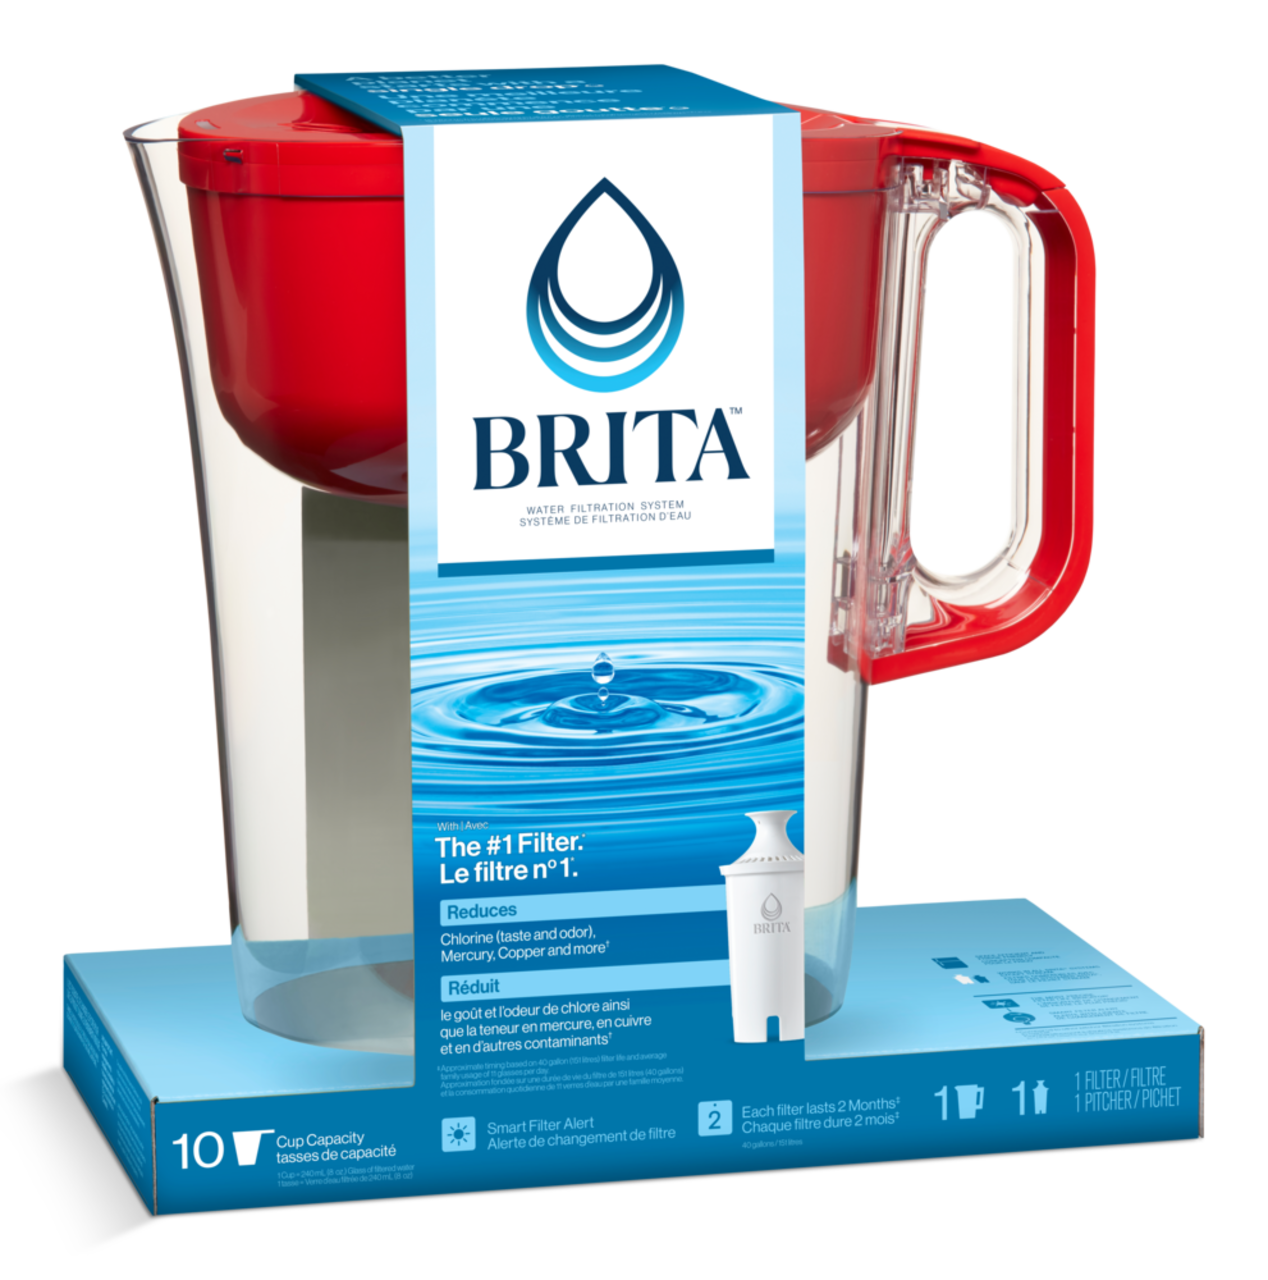 https://media-www.canadiantire.ca/product/living/kitchen/white-goods/1431000/brita-huron-pitcher-fiery-red-6a50d6f7-ccbc-4d20-9a27-83f9b129b4e6.png?imdensity=1&imwidth=640&impolicy=mZoom